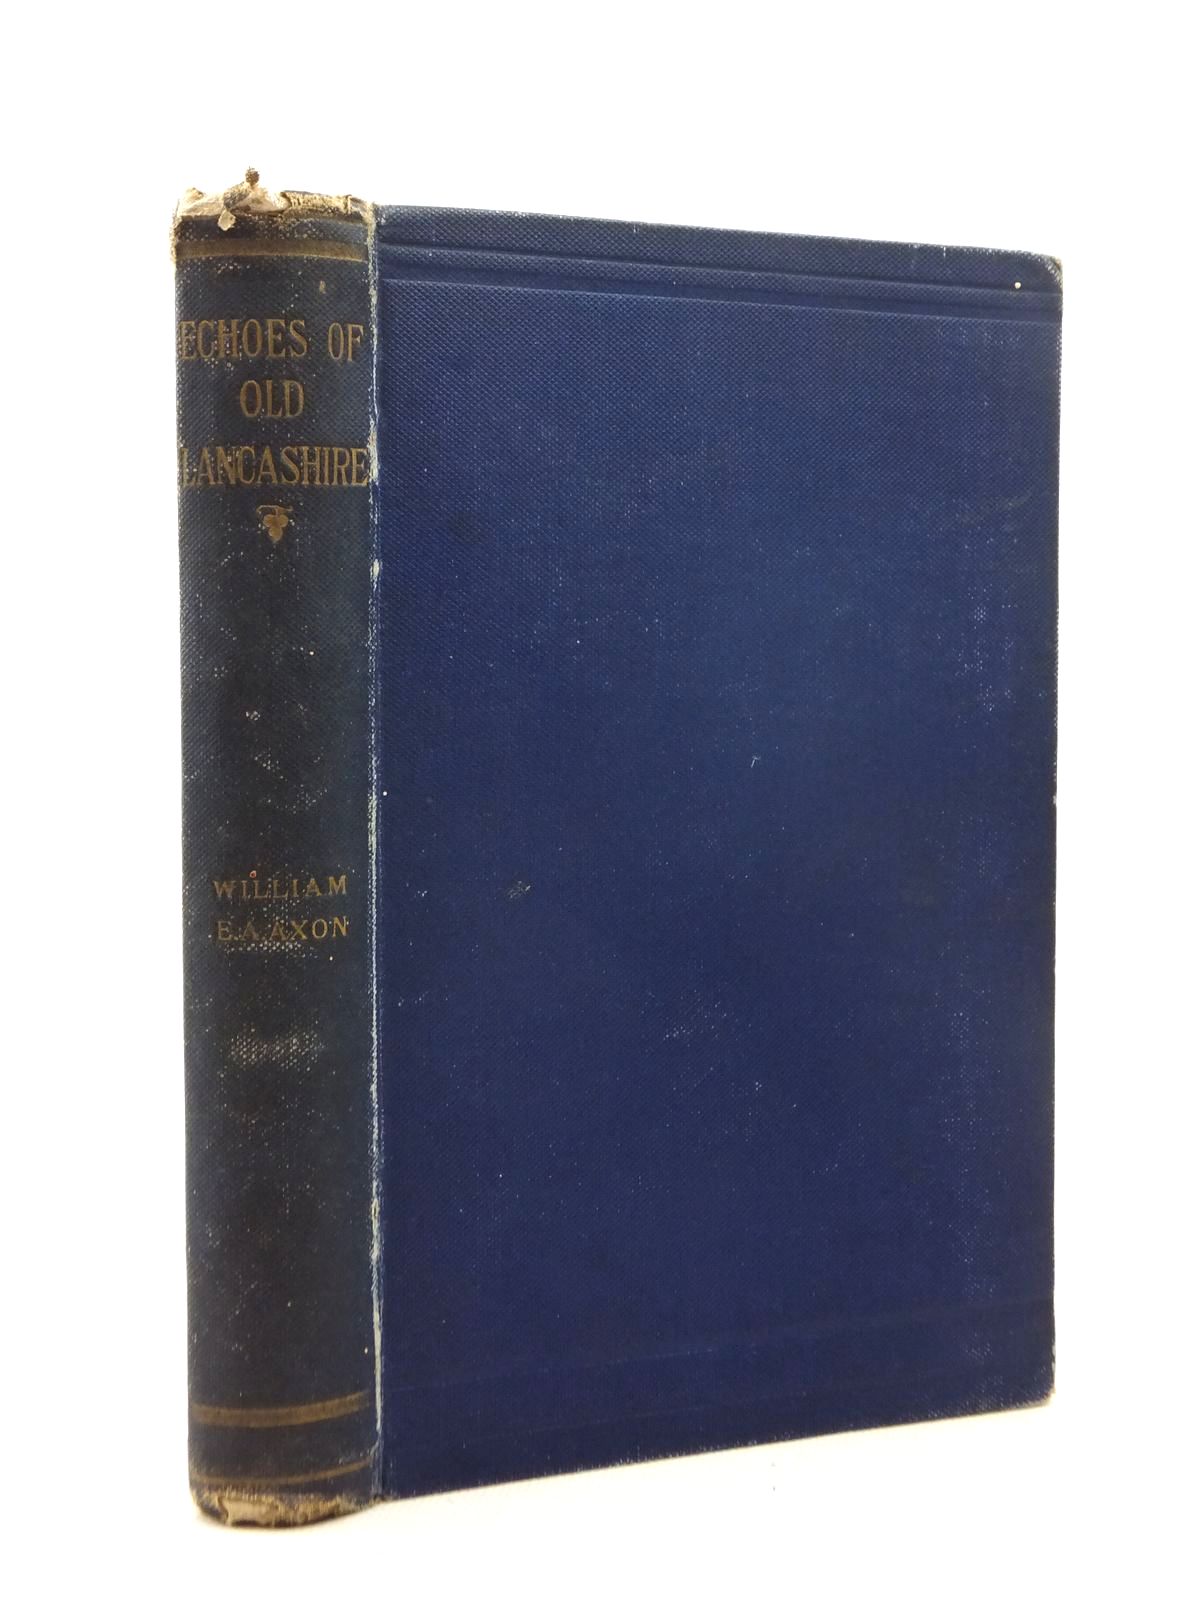 Photo of ECHOES OF OLD LANCASHIRE written by Axon, William E.A. published by William Andrews & Co. (STOCK CODE: 1208784)  for sale by Stella & Rose's Books